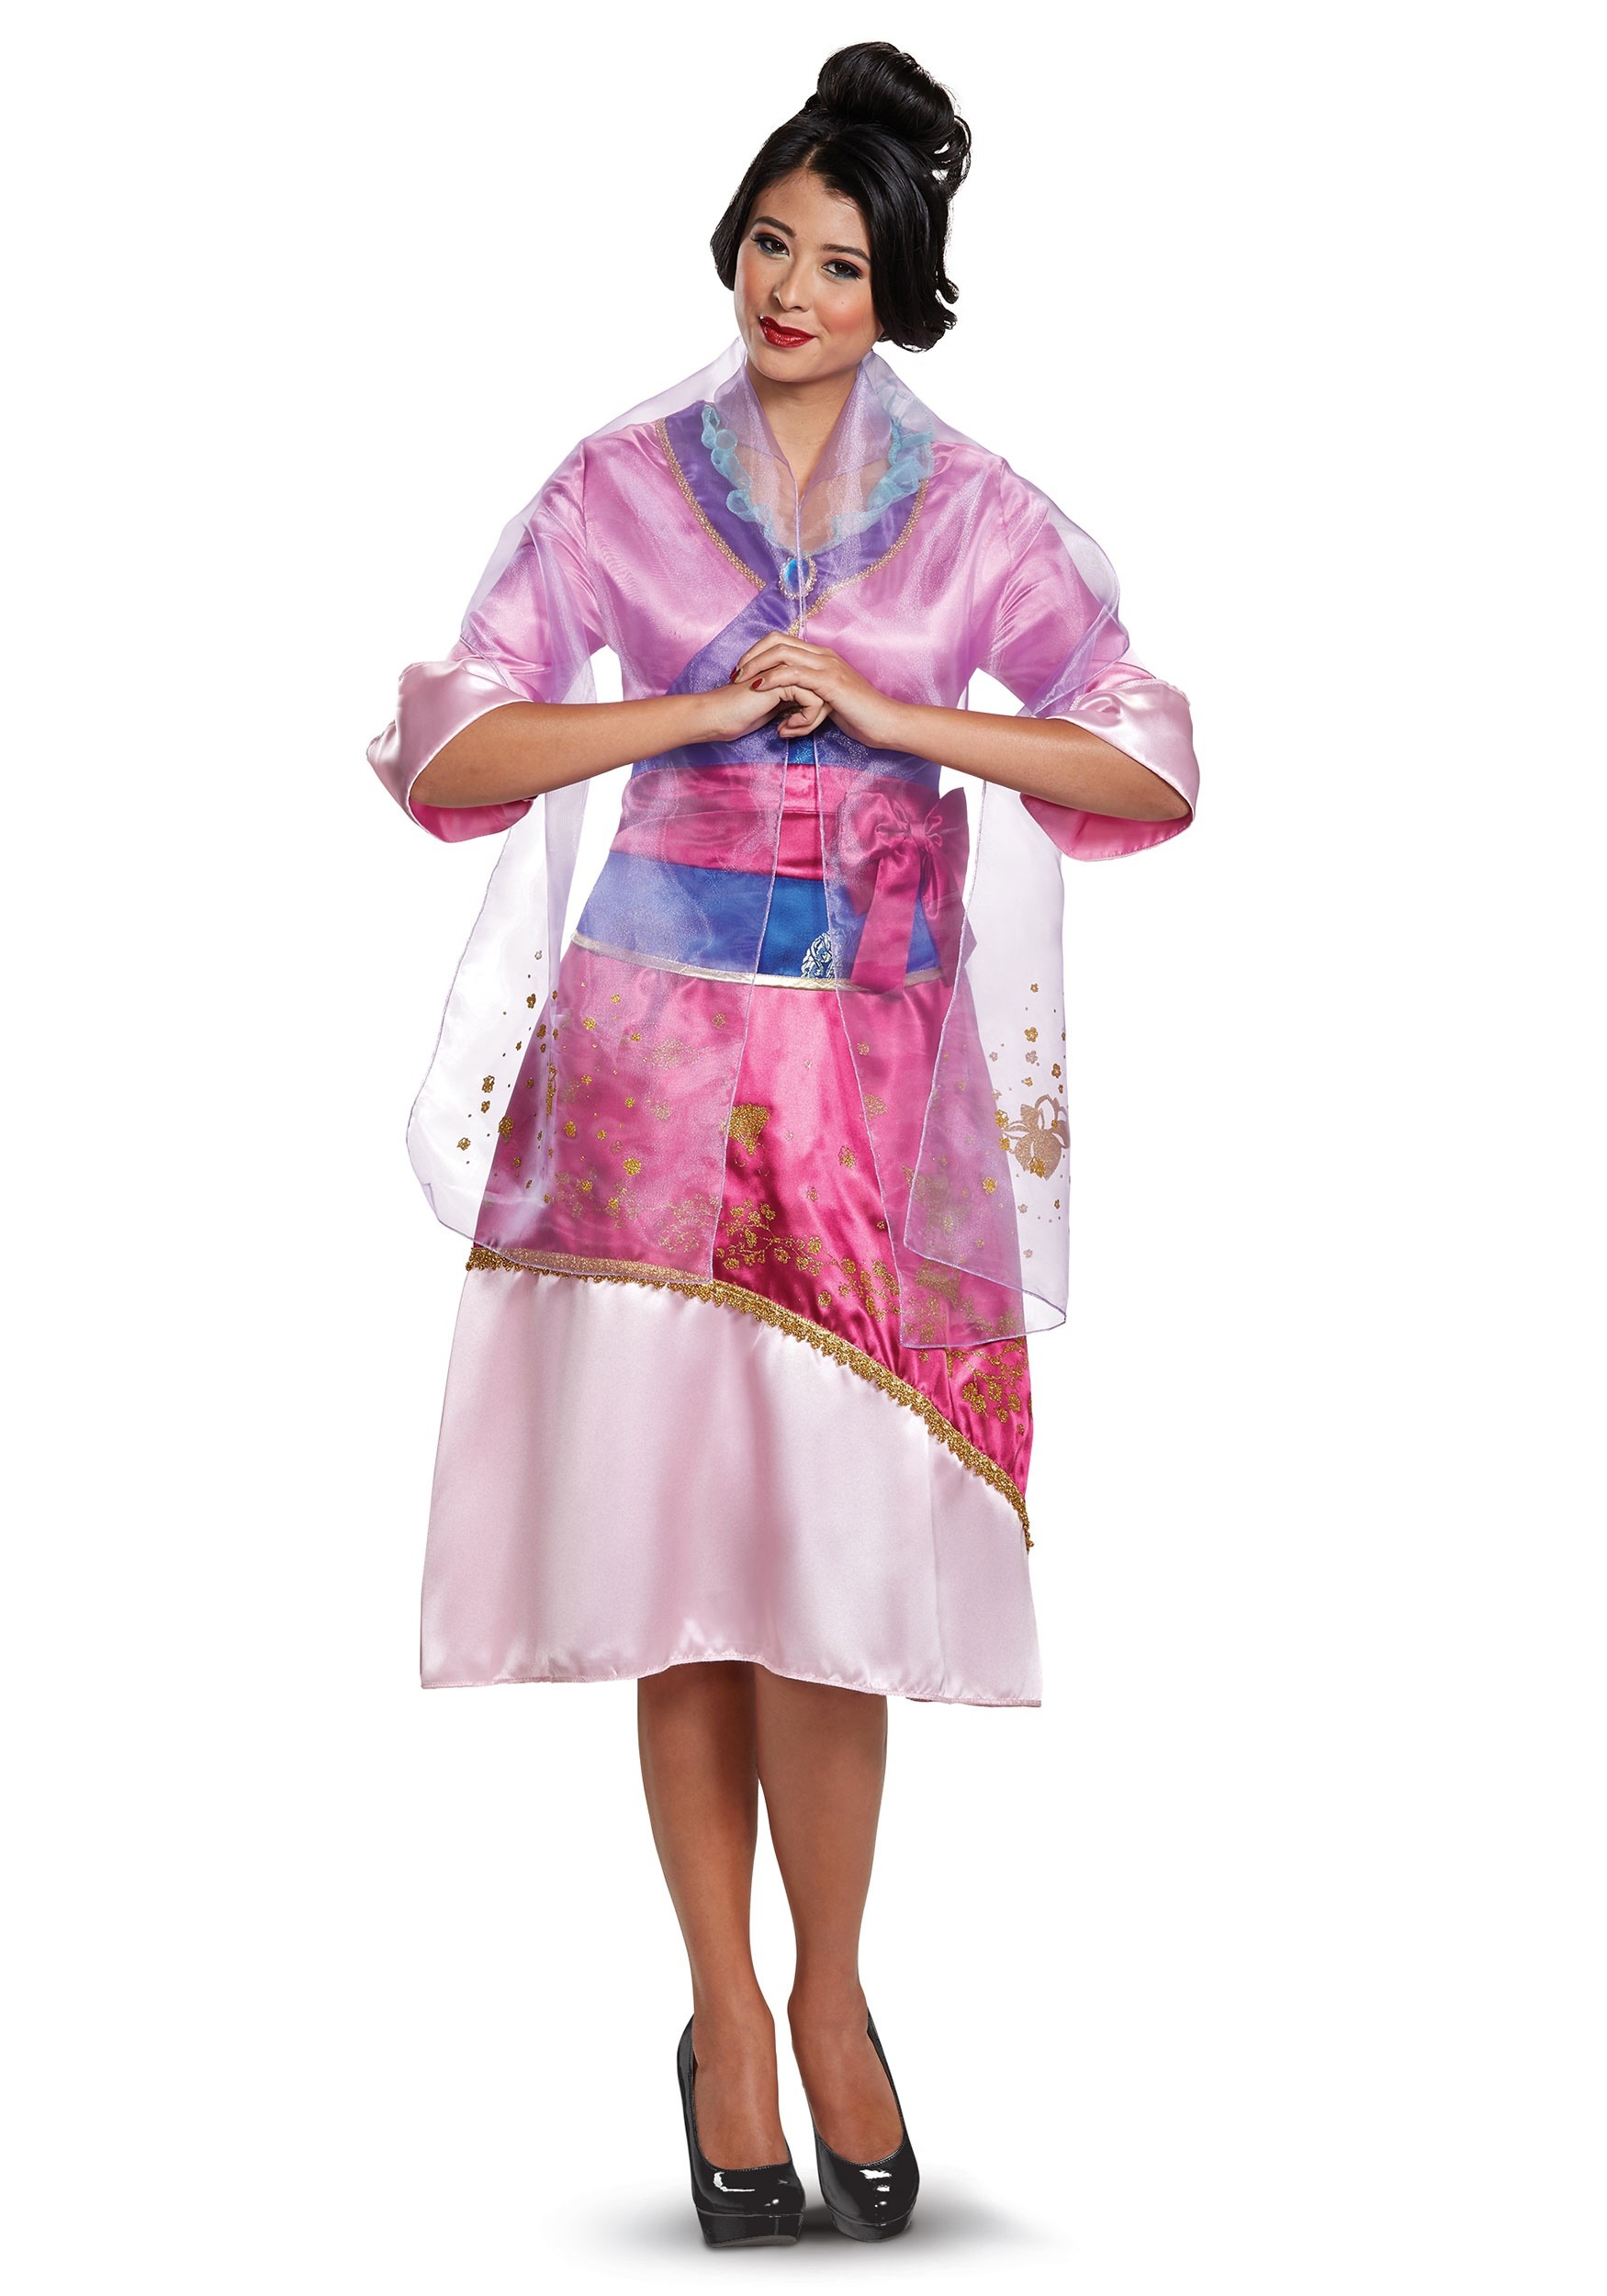 Photos - Fancy Dress Disney Disguise  Mulan Deluxe  Costume for Women Pink 